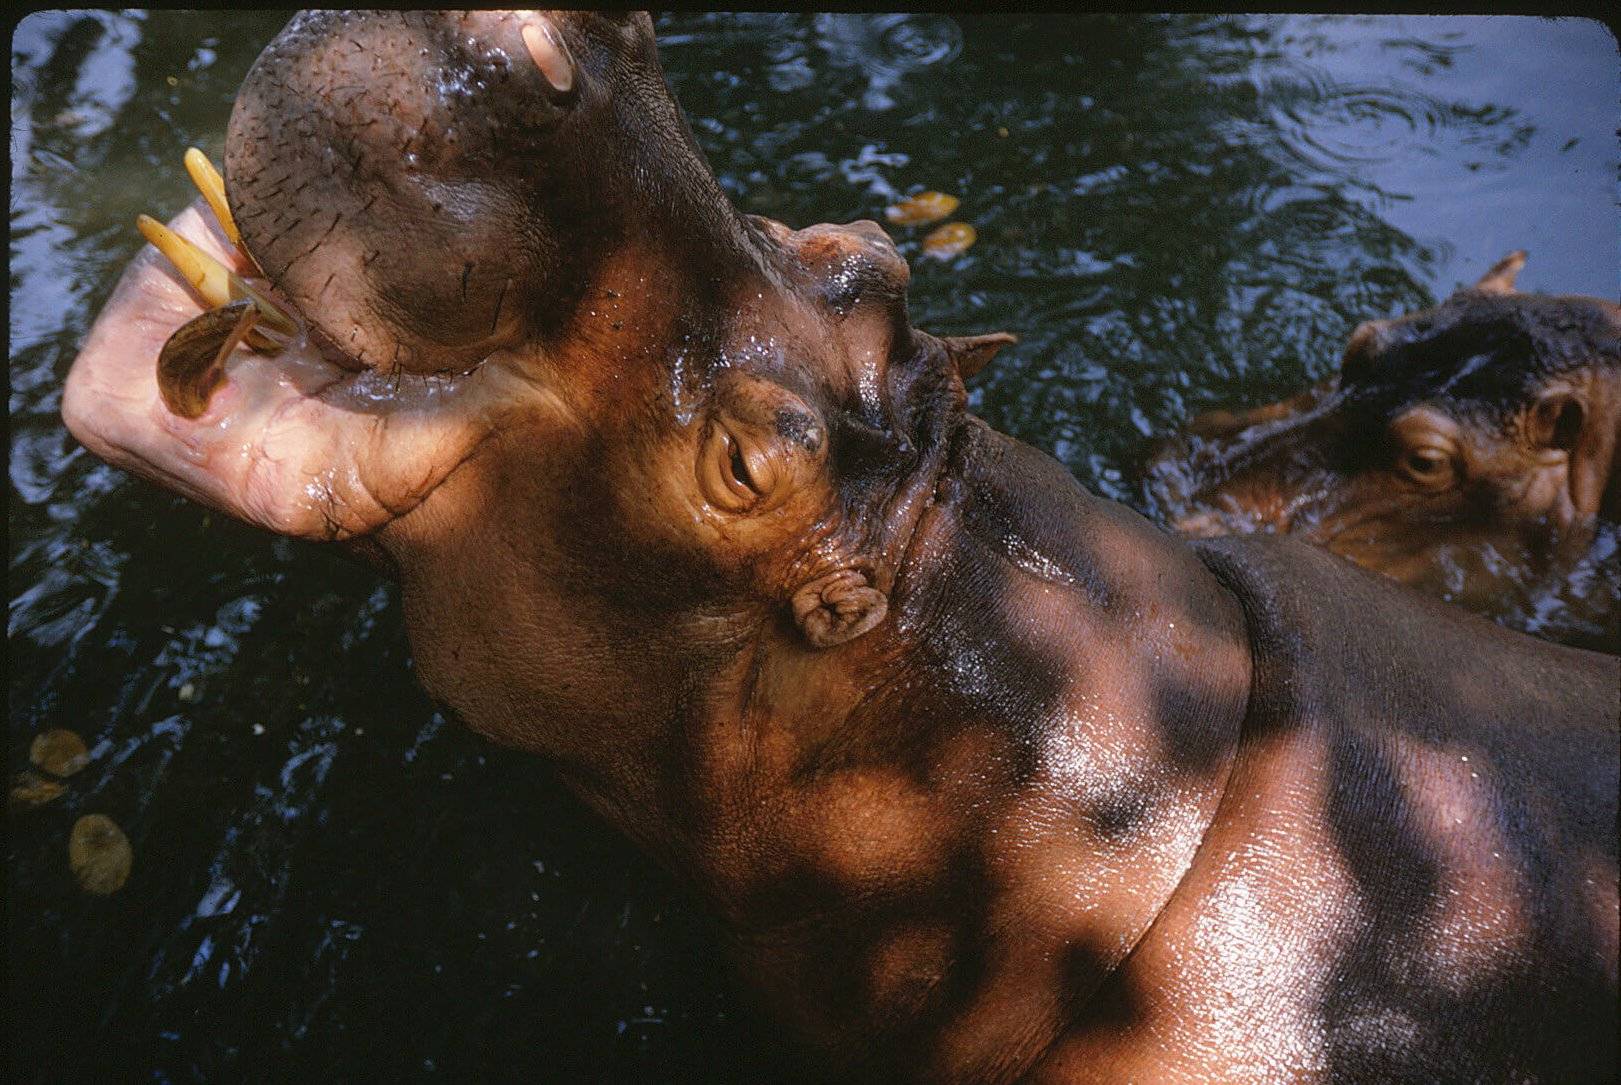 Two hippos, one rising out of the water up toward the photographer.